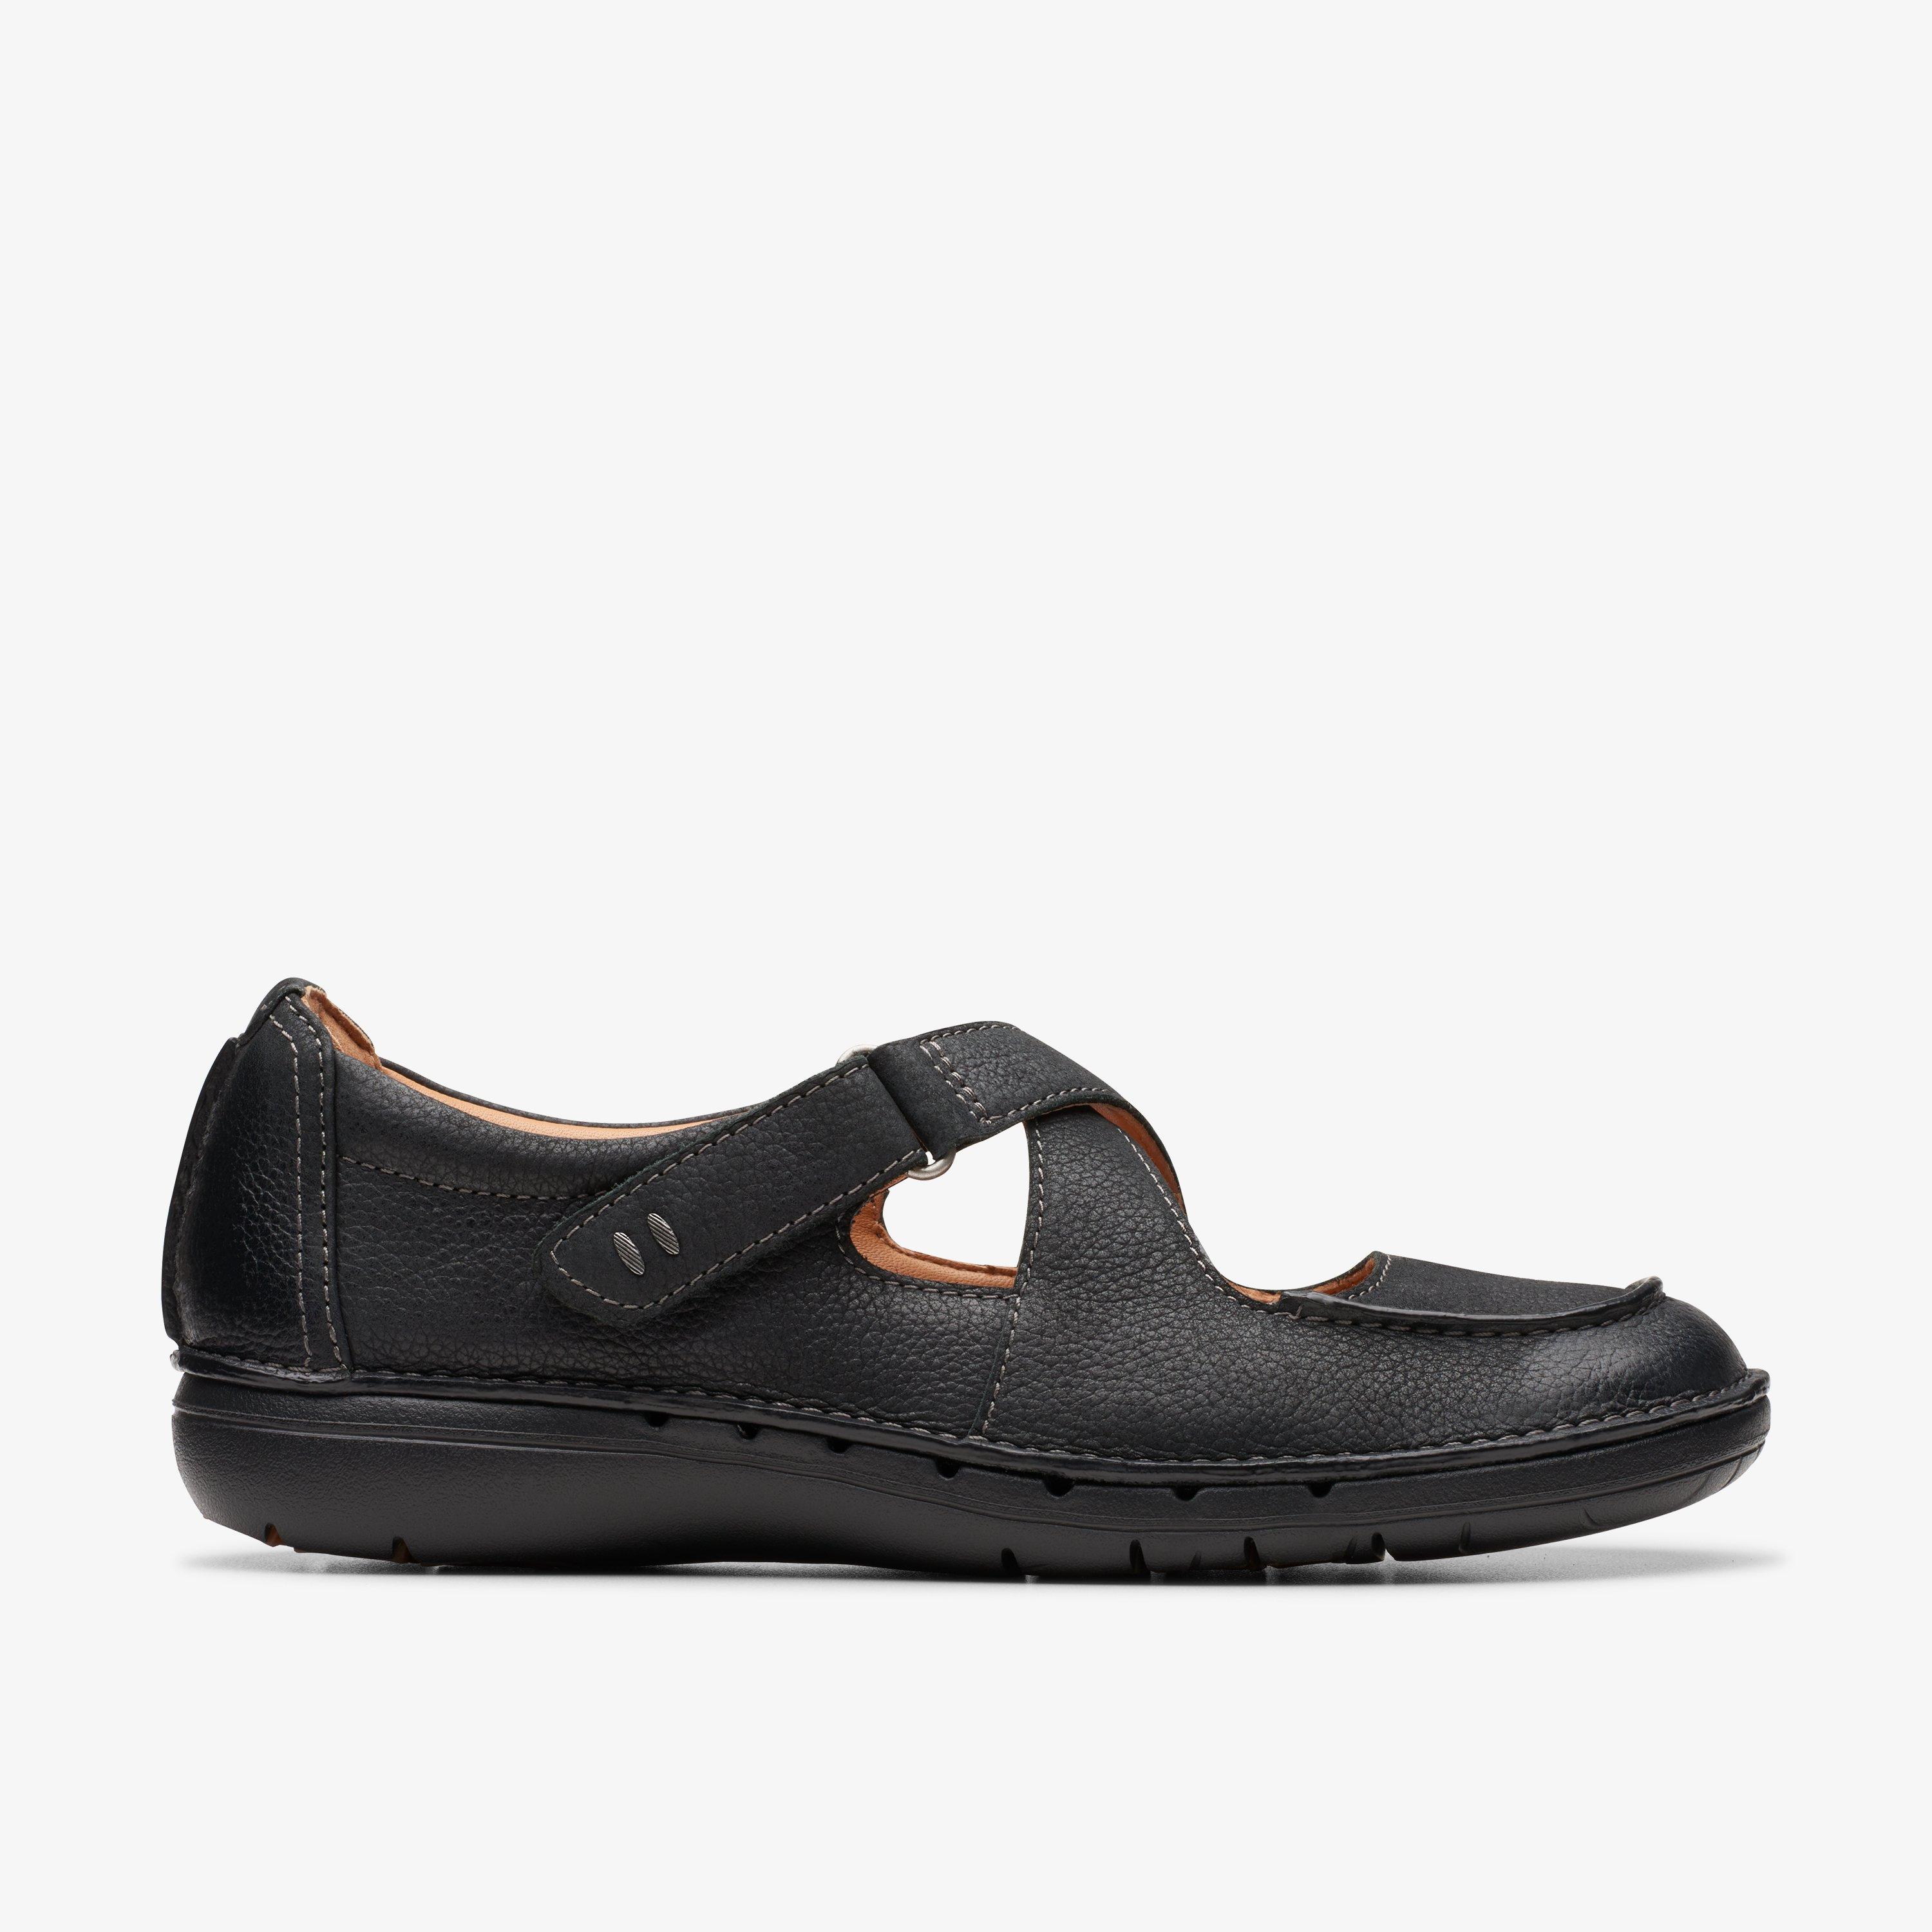 WOMENS Un Loop Strap Black Leather Mary Jane | Clarks US